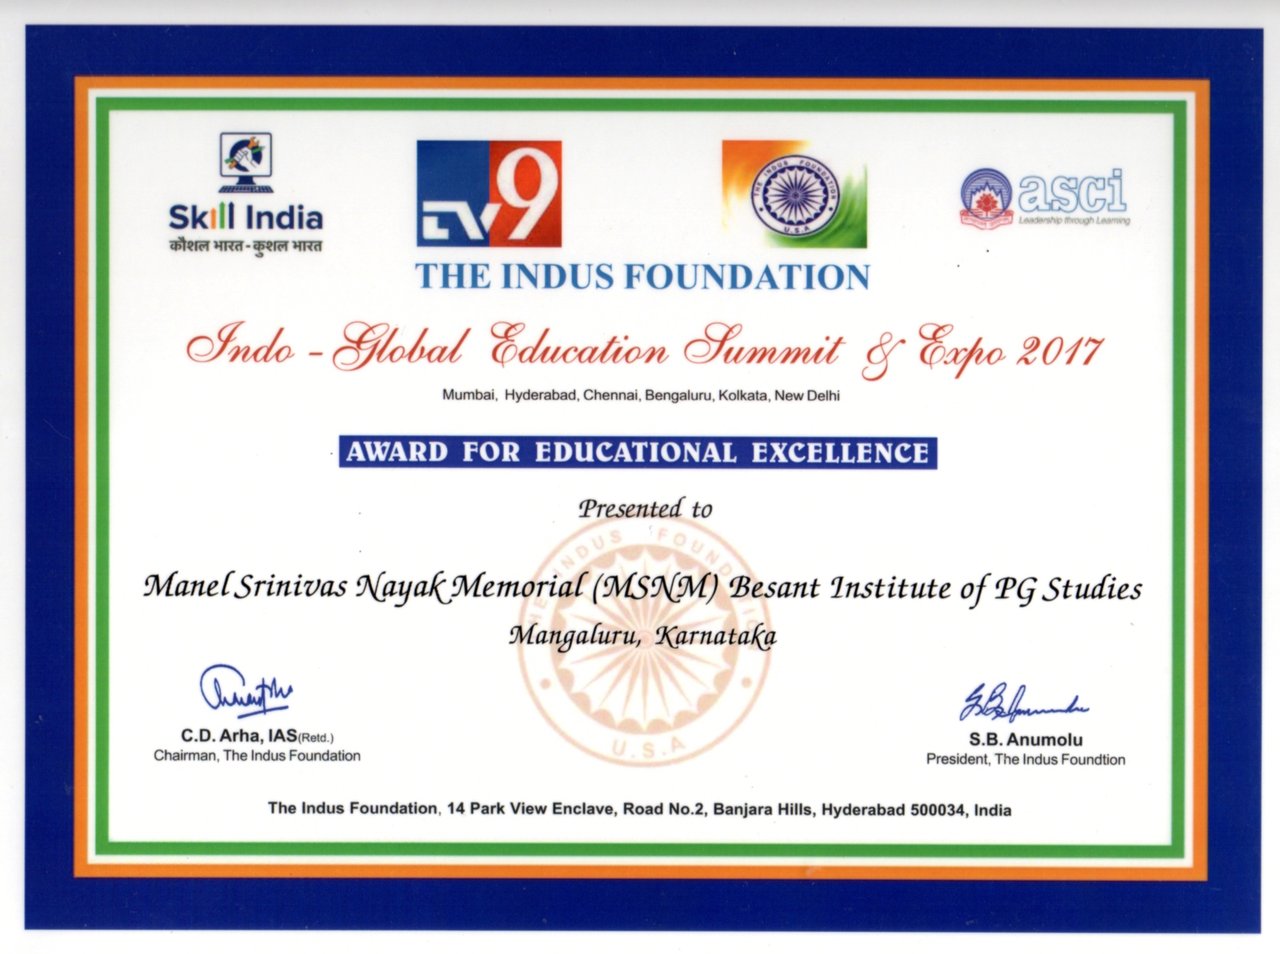 Award for Educational Excellence